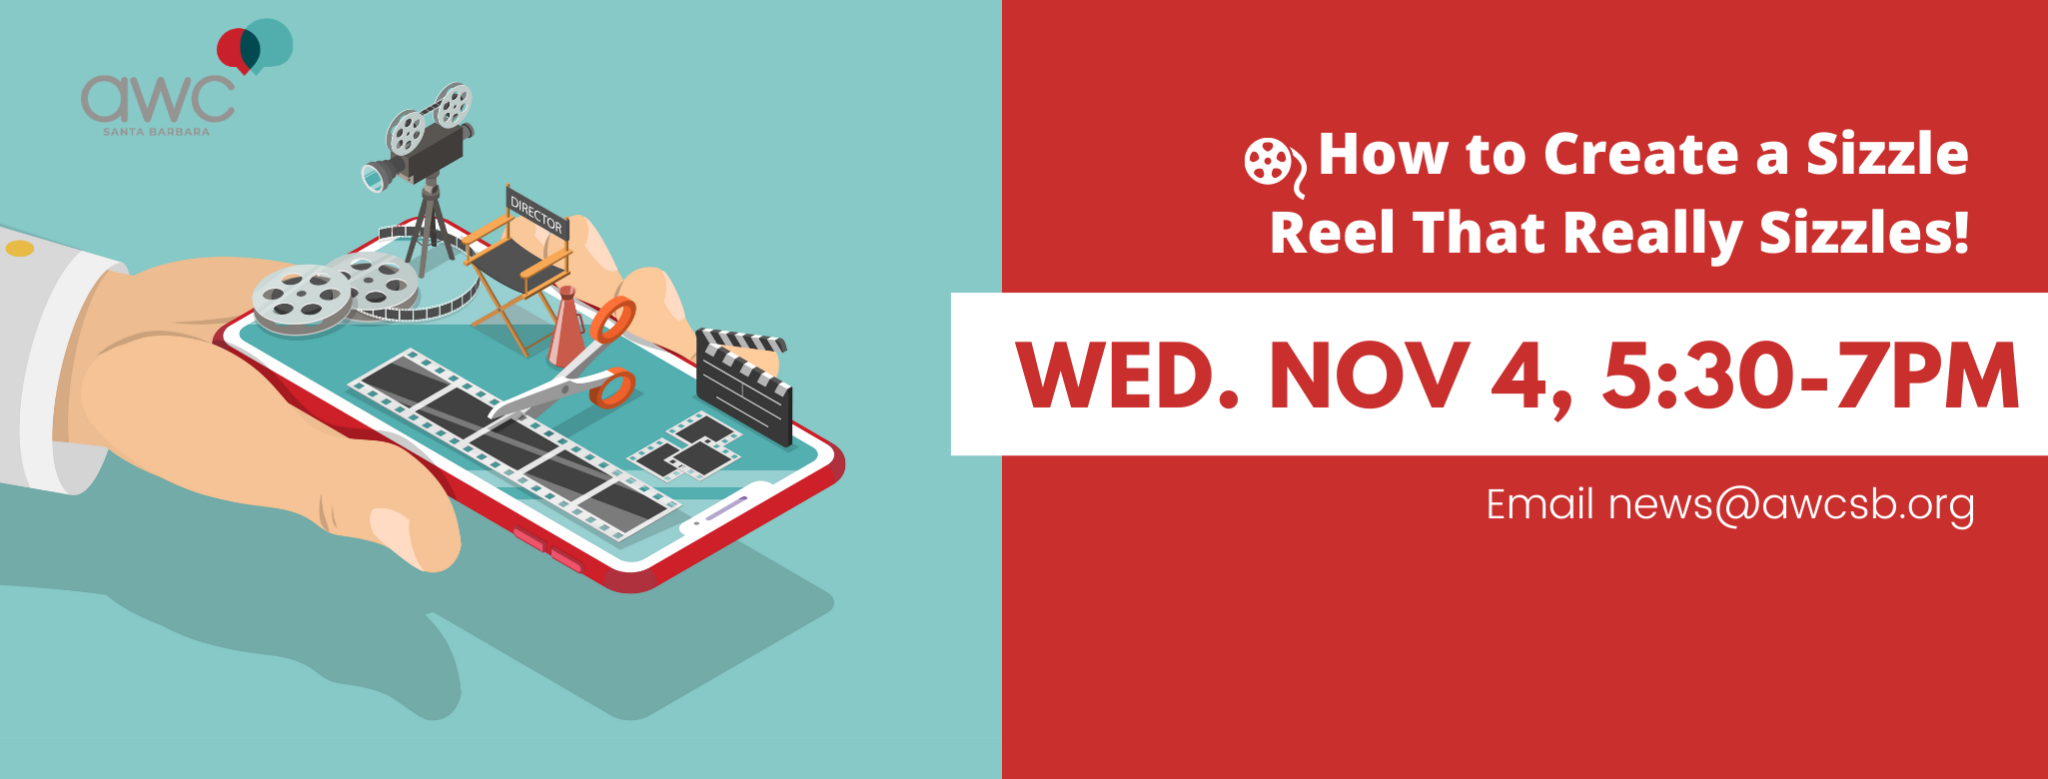 Wednesday Nov 4 How to Create a Sizzle Reel That Really Sizzles! AWC